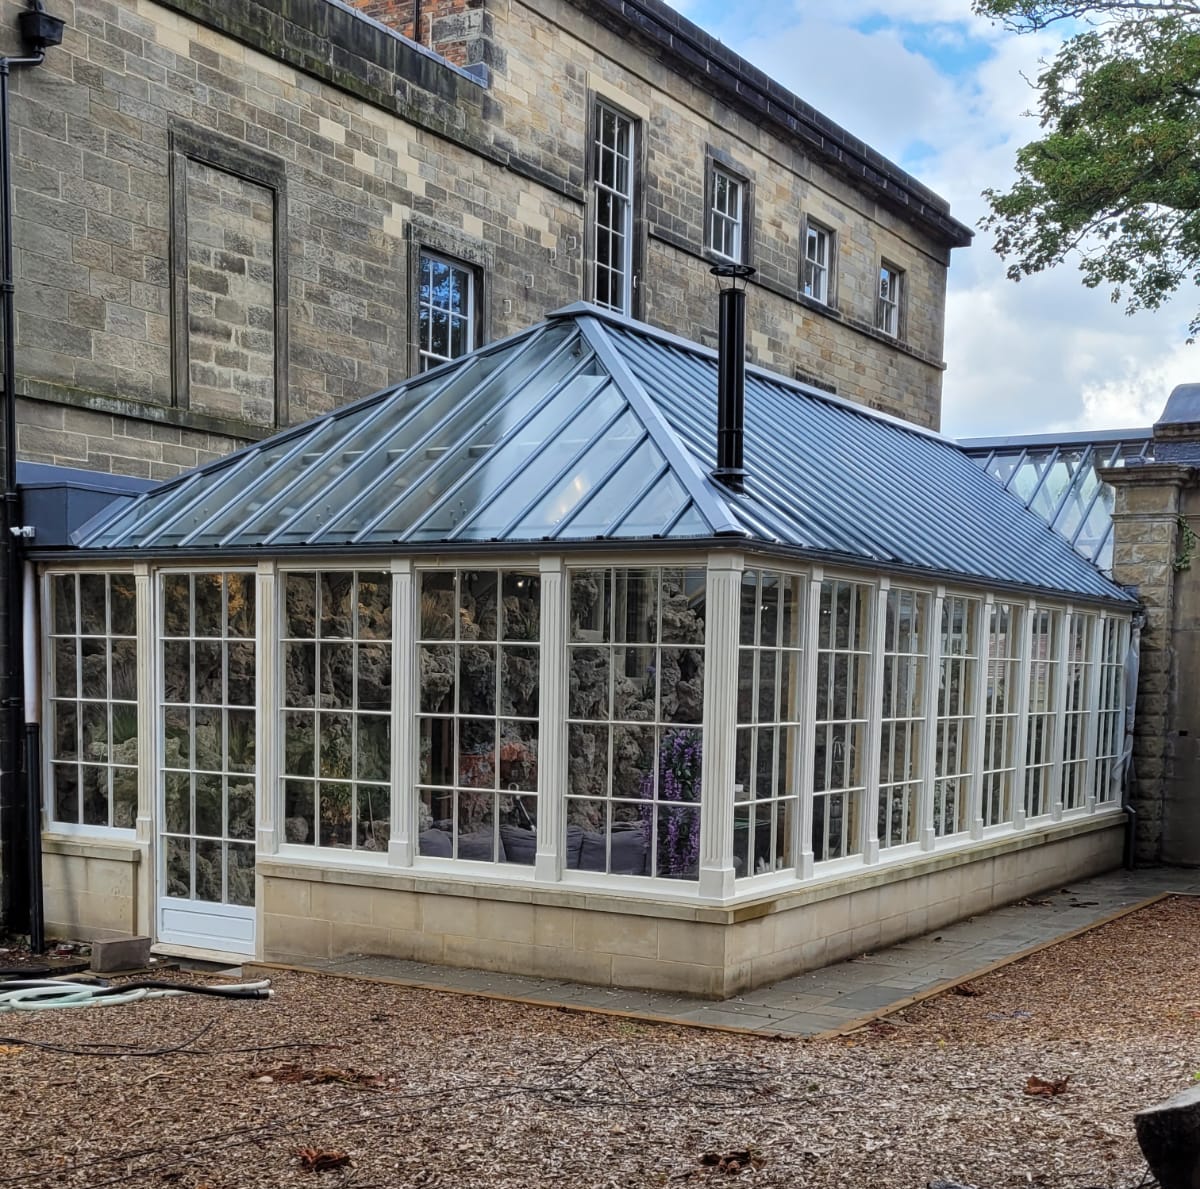 Howells Patent Glazing conservatory roof for mansion refurbishment at , Doxford House in Sunderland, a derelict Georgian mansion, listed on the 2009 Heritage at Risk Register.